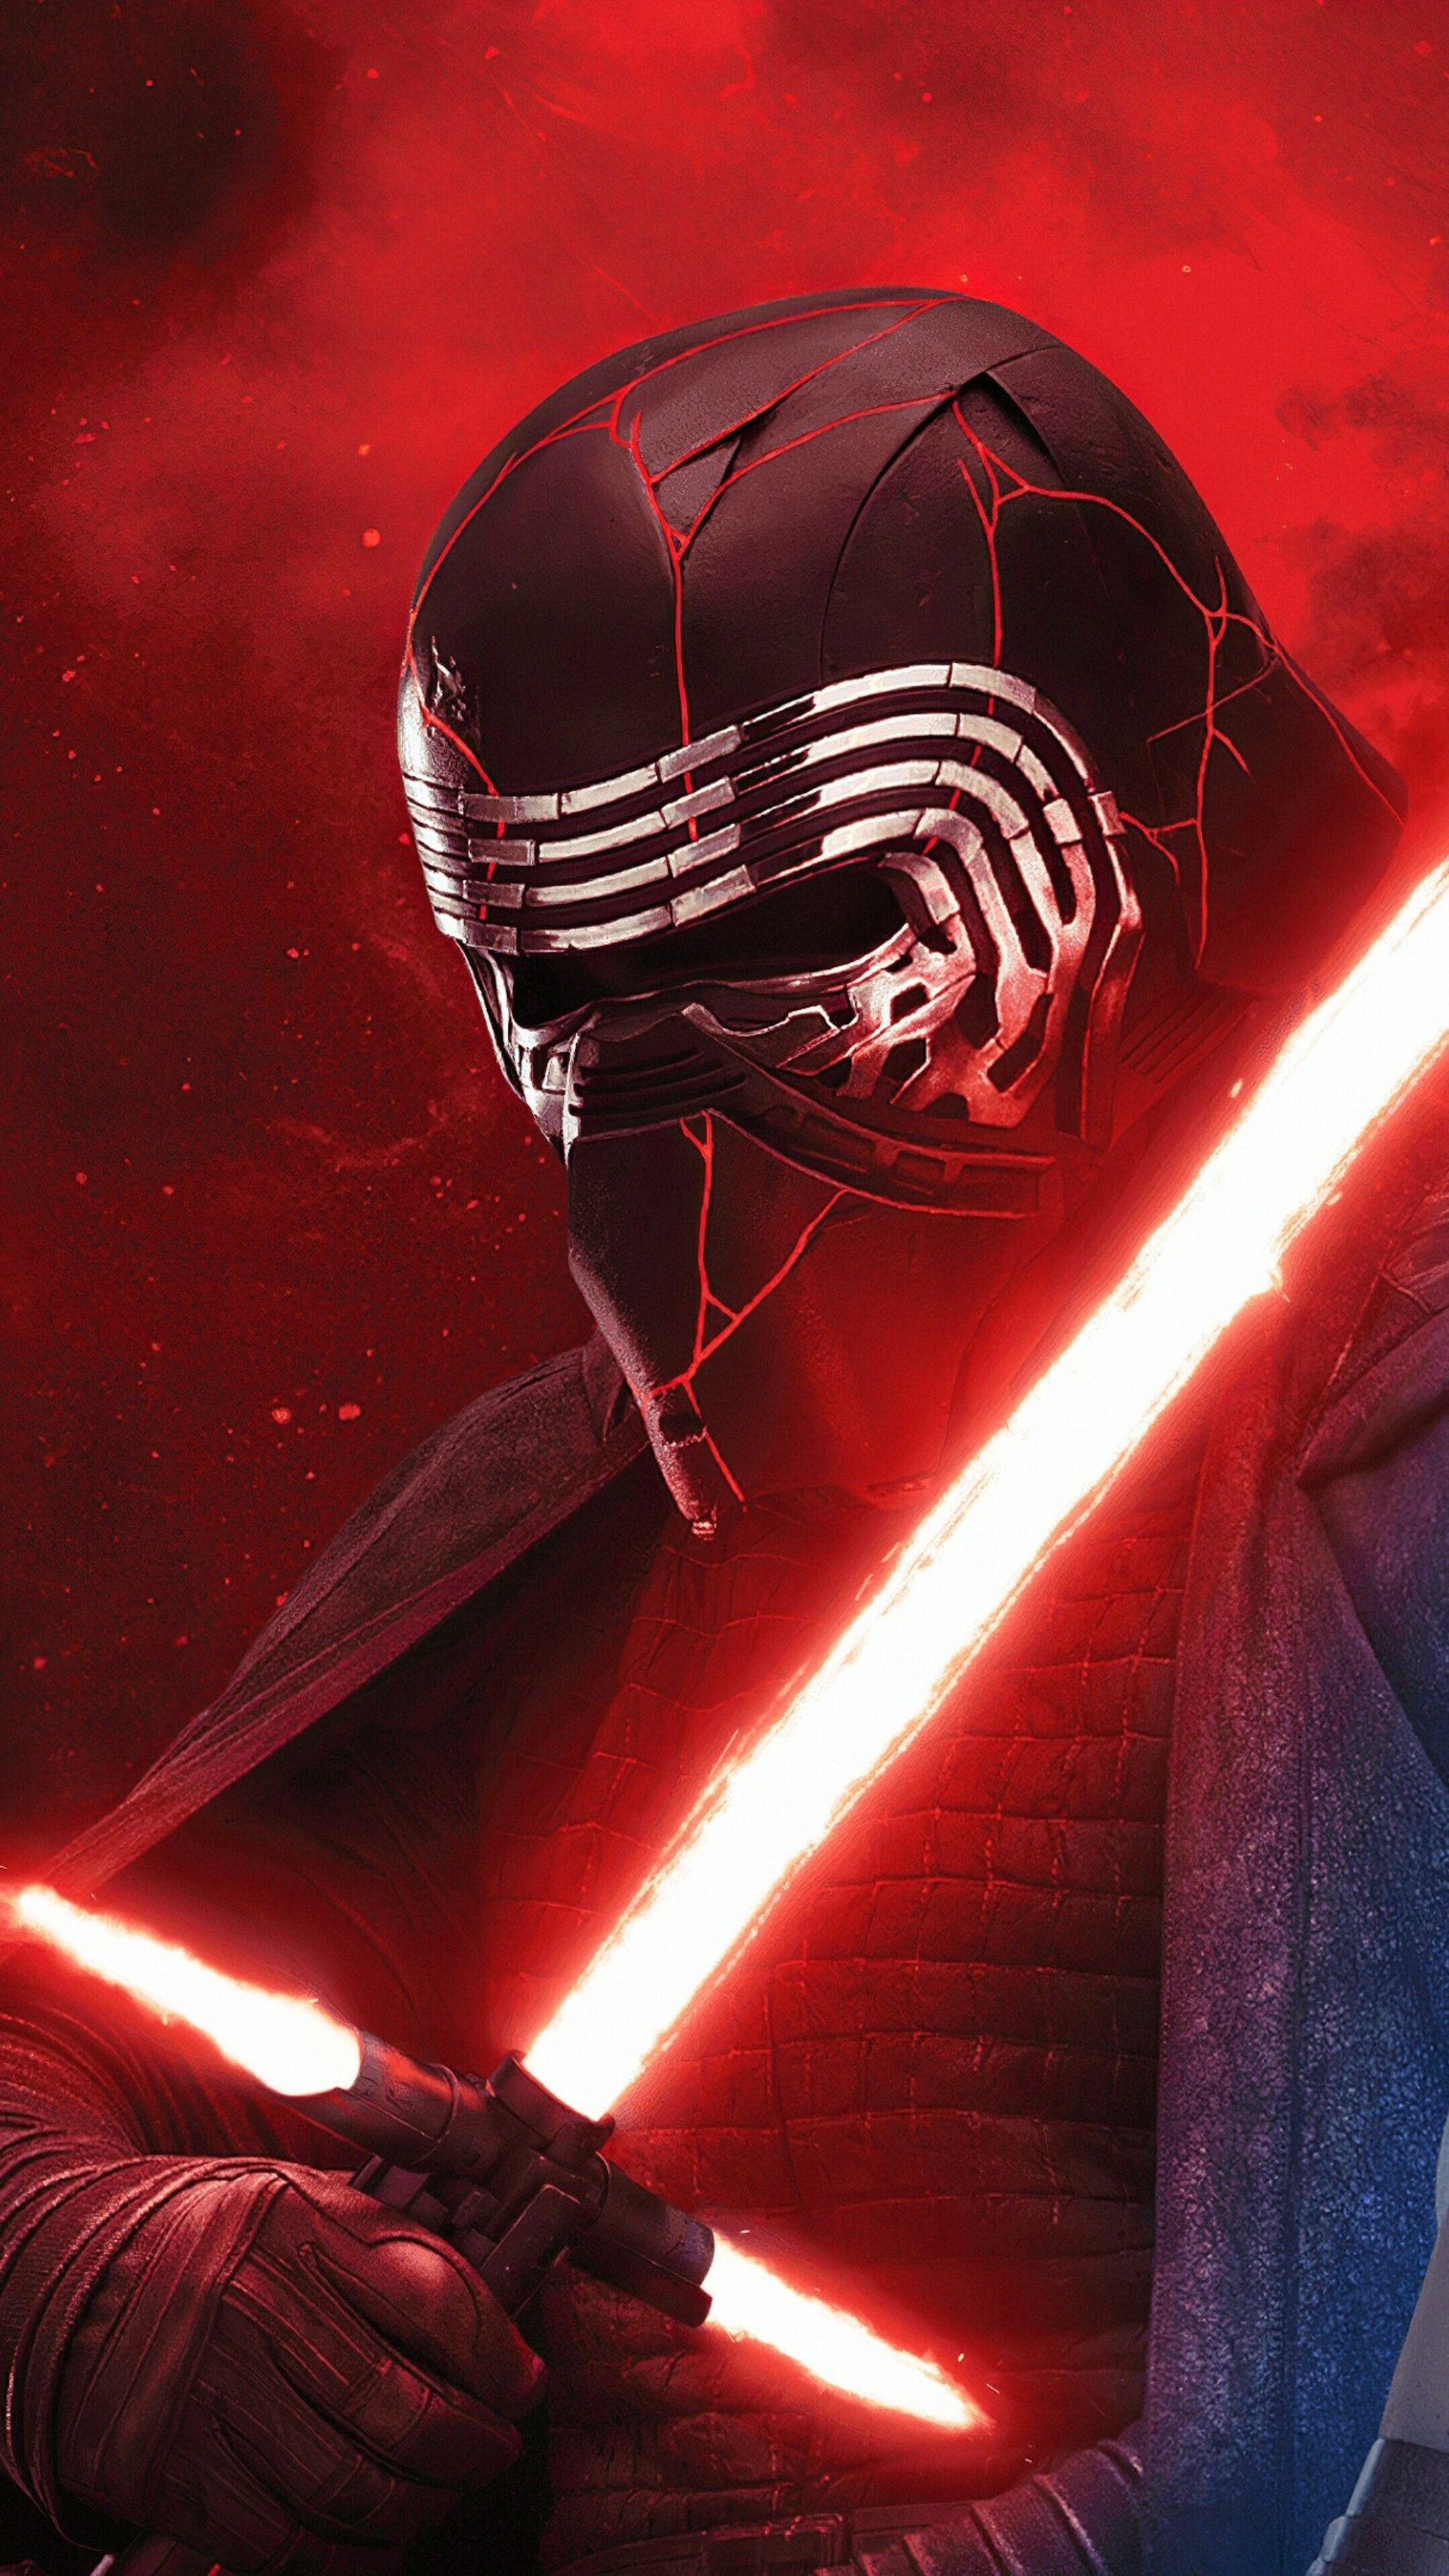 Kylo Ren Mask, Android wallpaper, Sith lord's visage, Supreme Leader's mask, 2160x3840 4K Handy